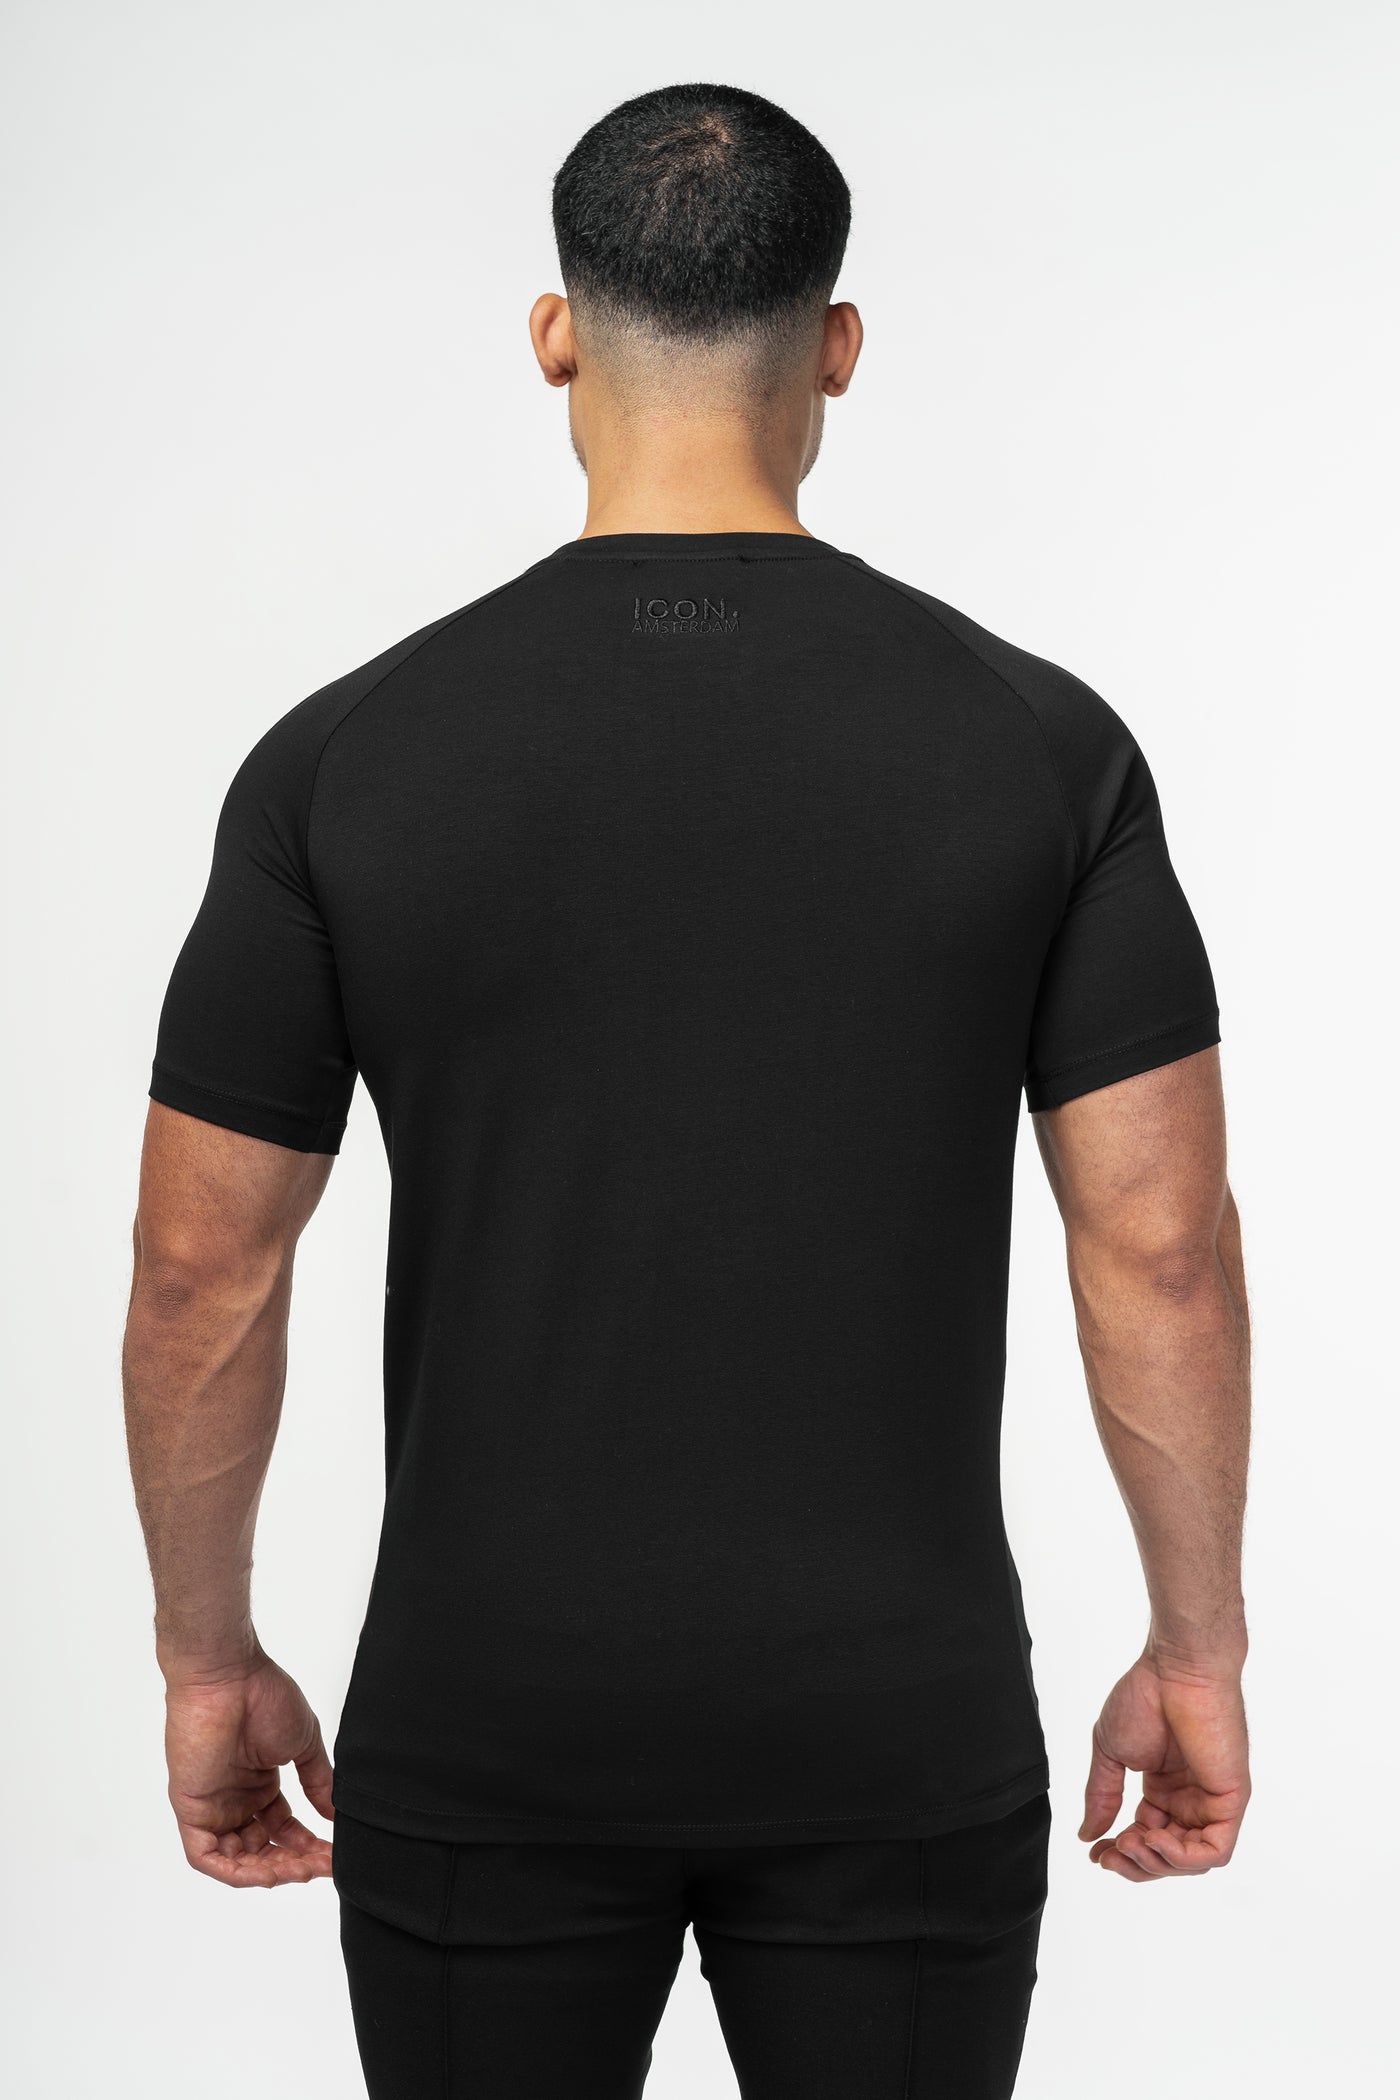 THE MUSCLE BASIC T-SHIRT - BLACK - ICON. AMSTERDAM